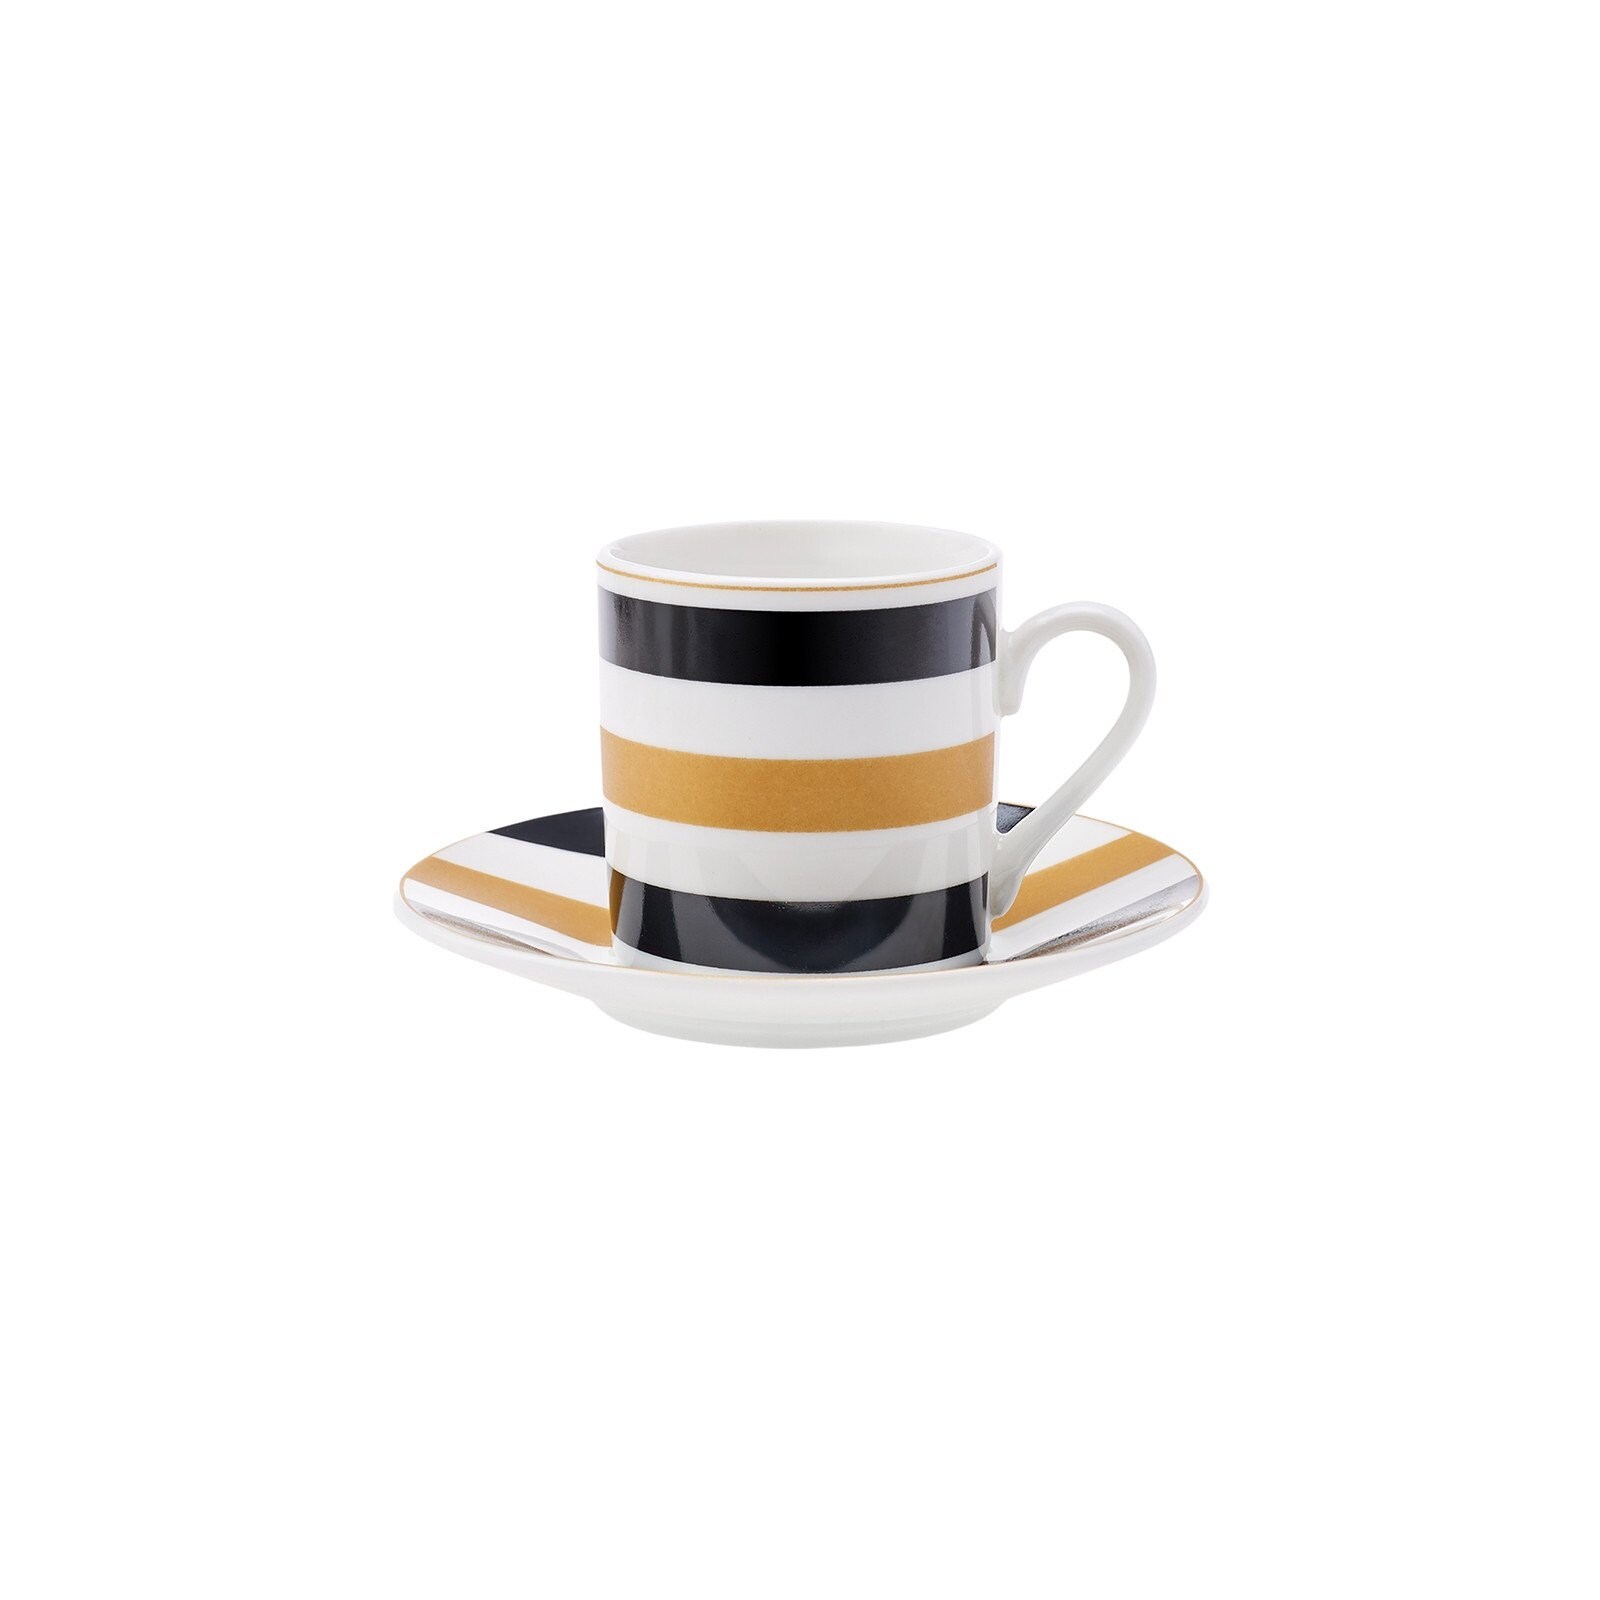 https://ak1.ostkcdn.com/images/products/is/images/direct/1e599f33353650f7d11b69af7f137792b42af23f/Karaca-Nautica-Turkish-Coffee-Cup-and-Saucer-Set-for-6.jpg